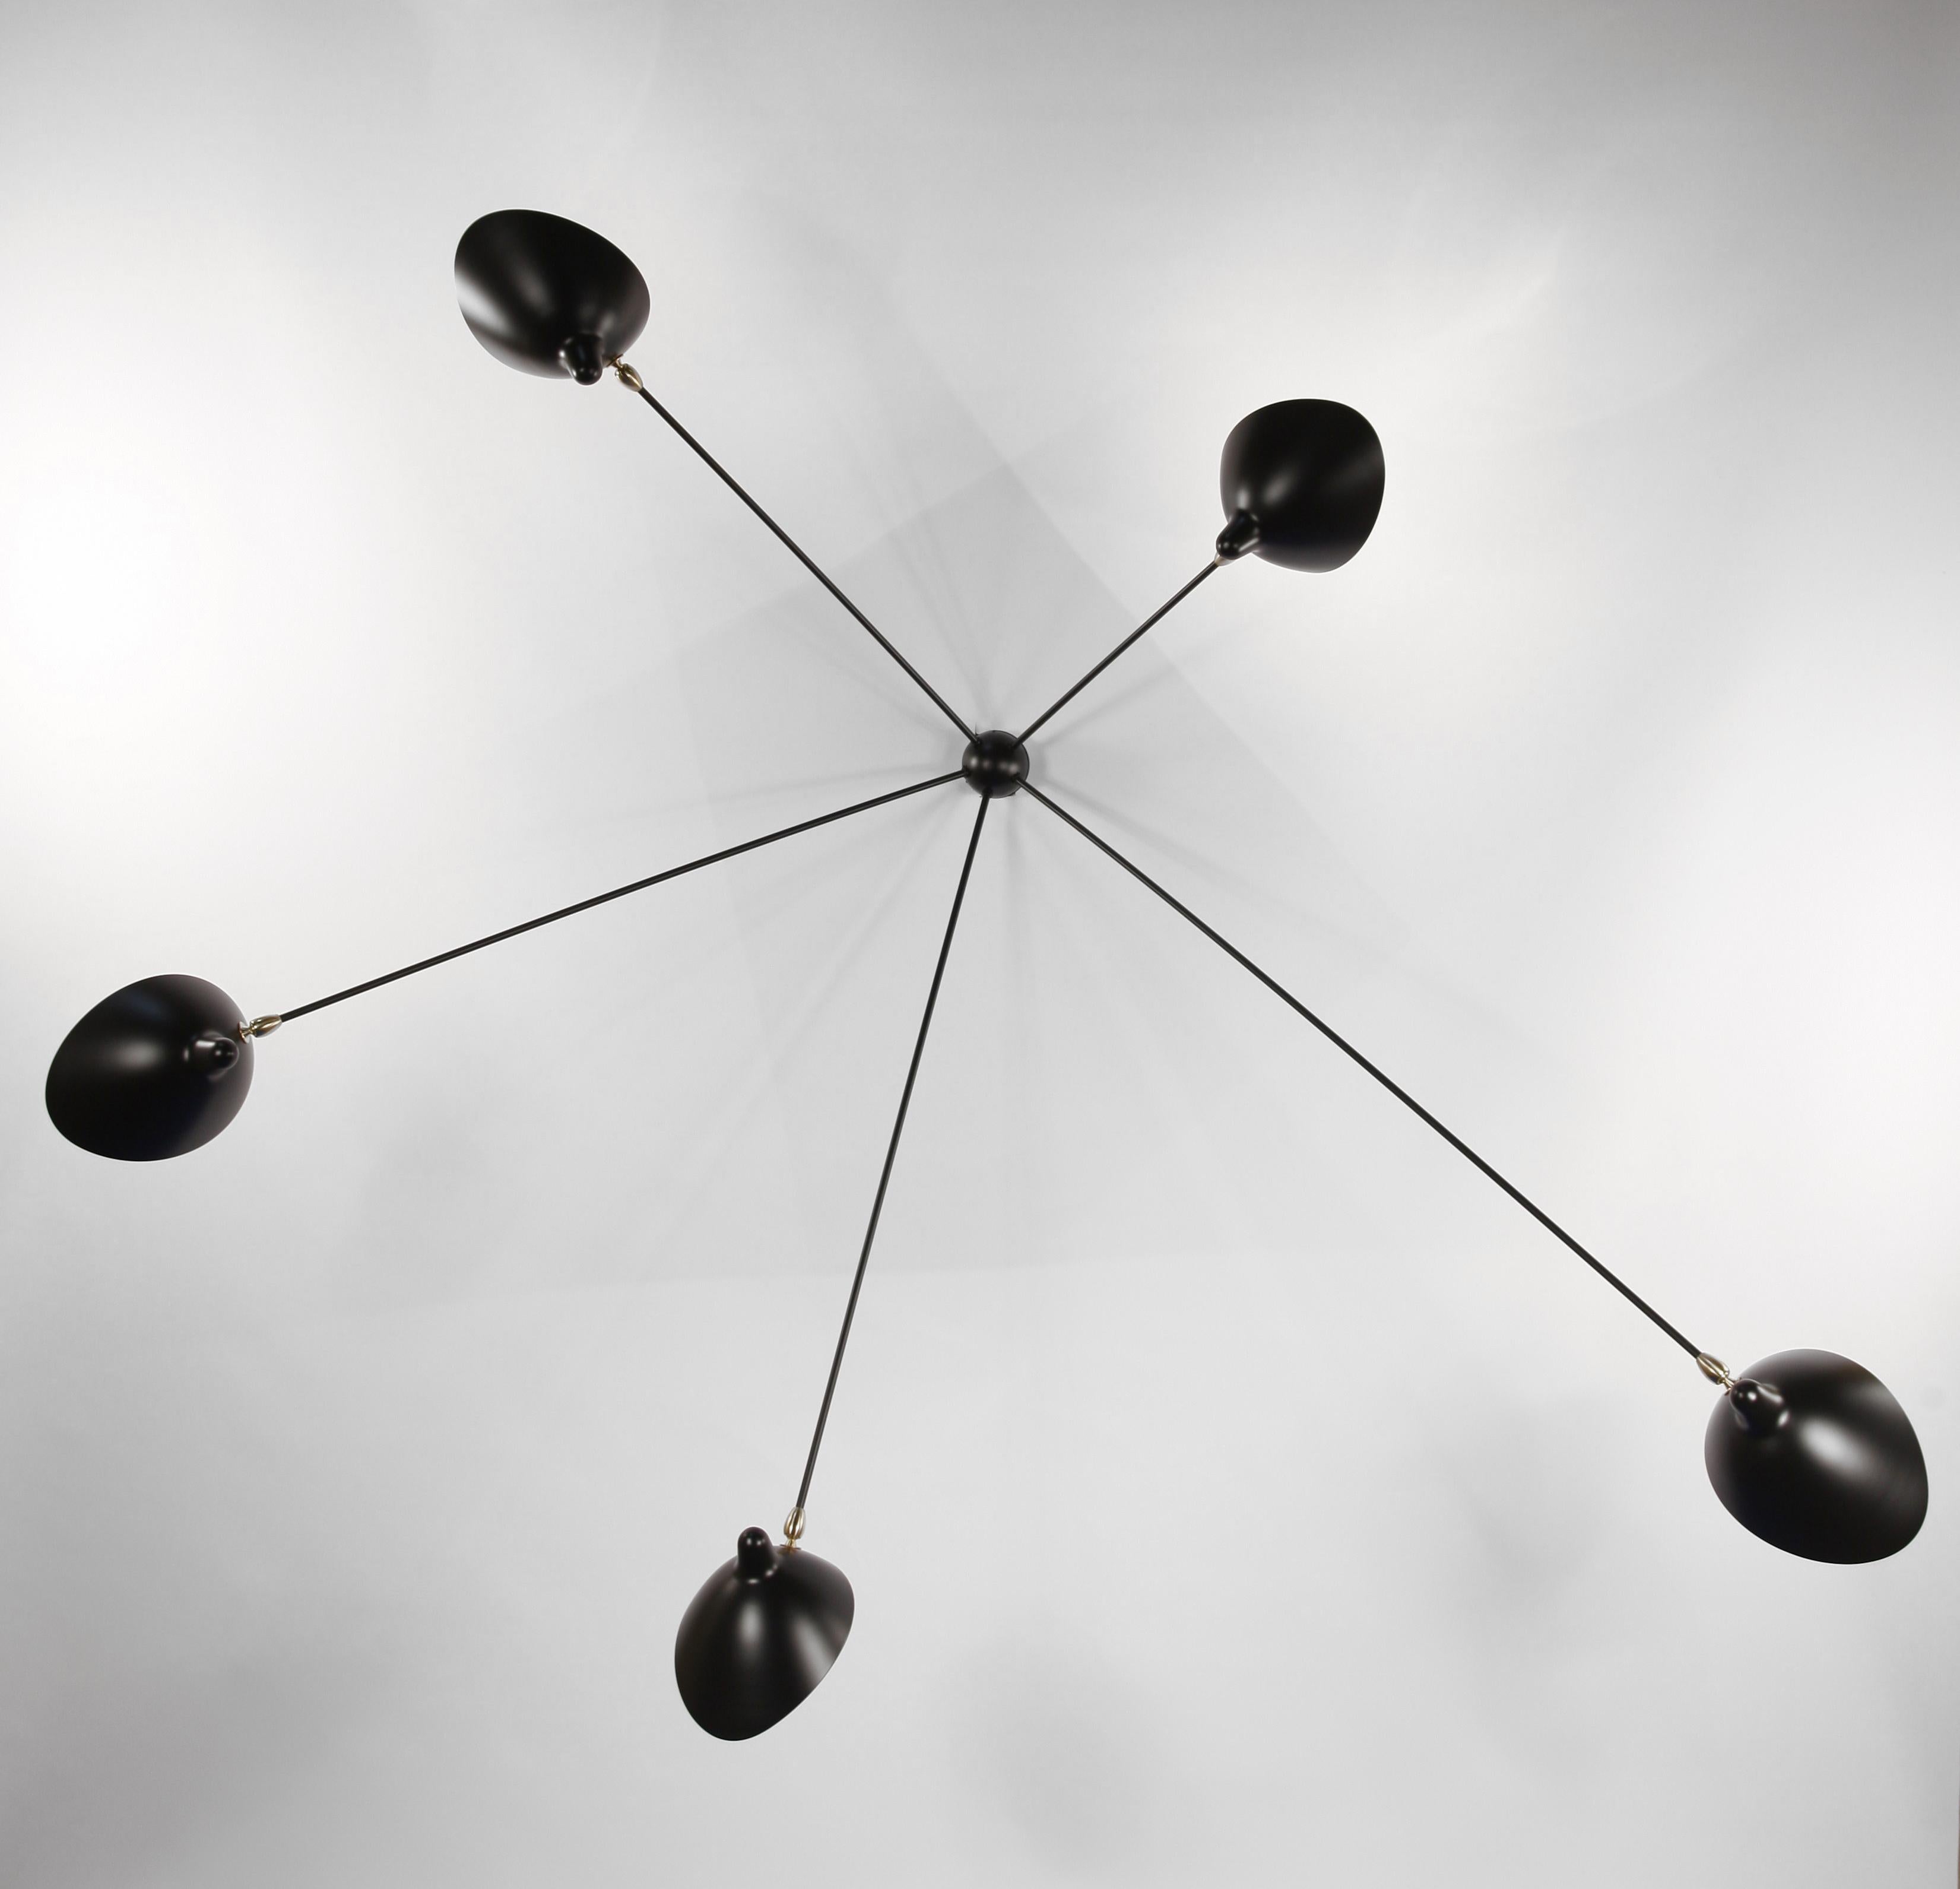 Ceiling wall lamp model 'Five Fixed Arms Spider Wall Lamp' designed by Serge Mouille in 1953.

Manufactured by Editions Serge Mouille in France. The production of lamps, wall lights and floor lamps are manufactured using craftsman’s techniques with